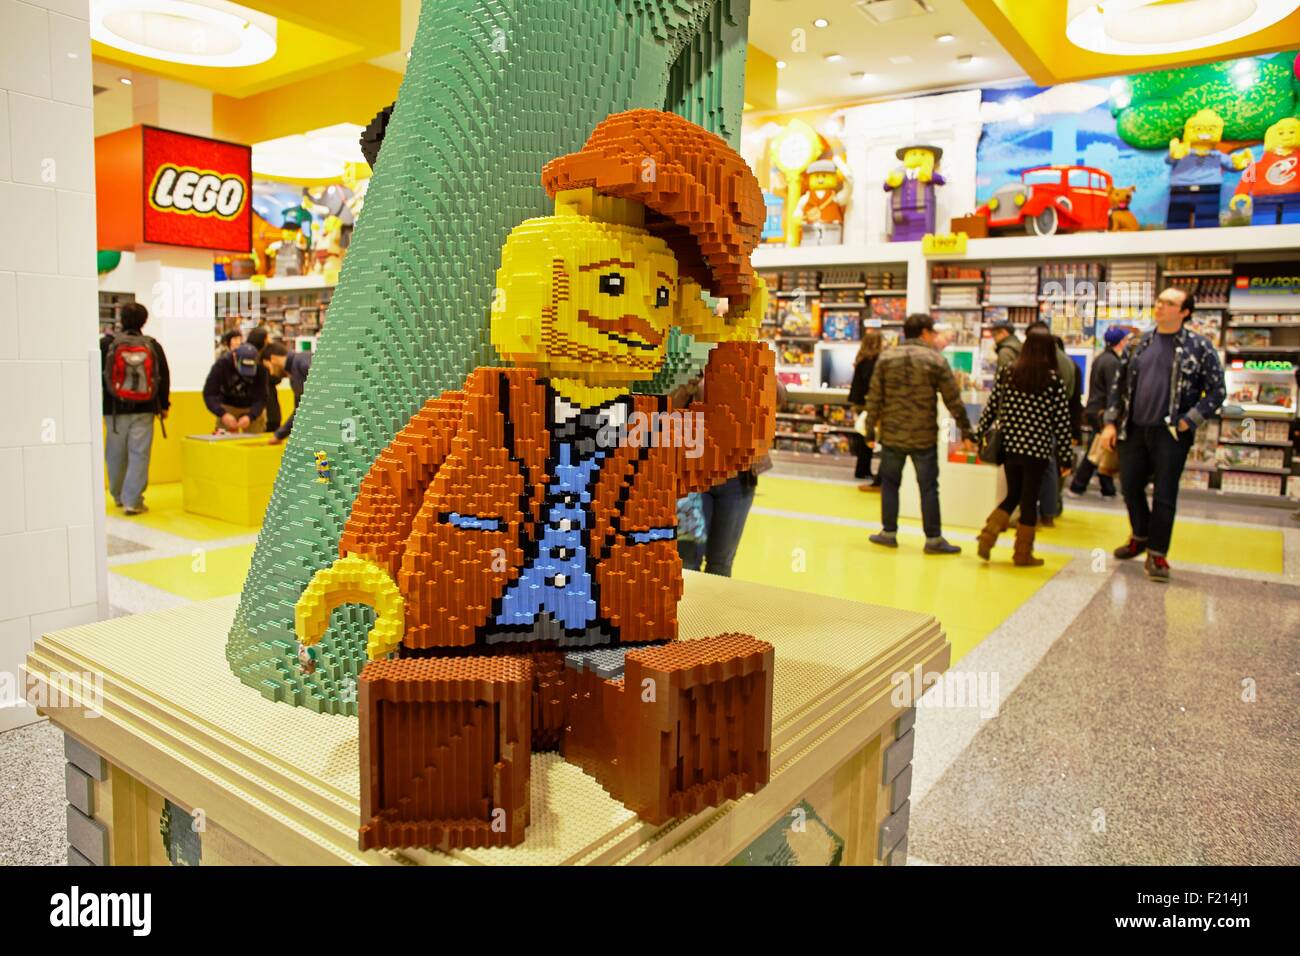 Lego Store High Resolution Stock Photography and Images - Alamy